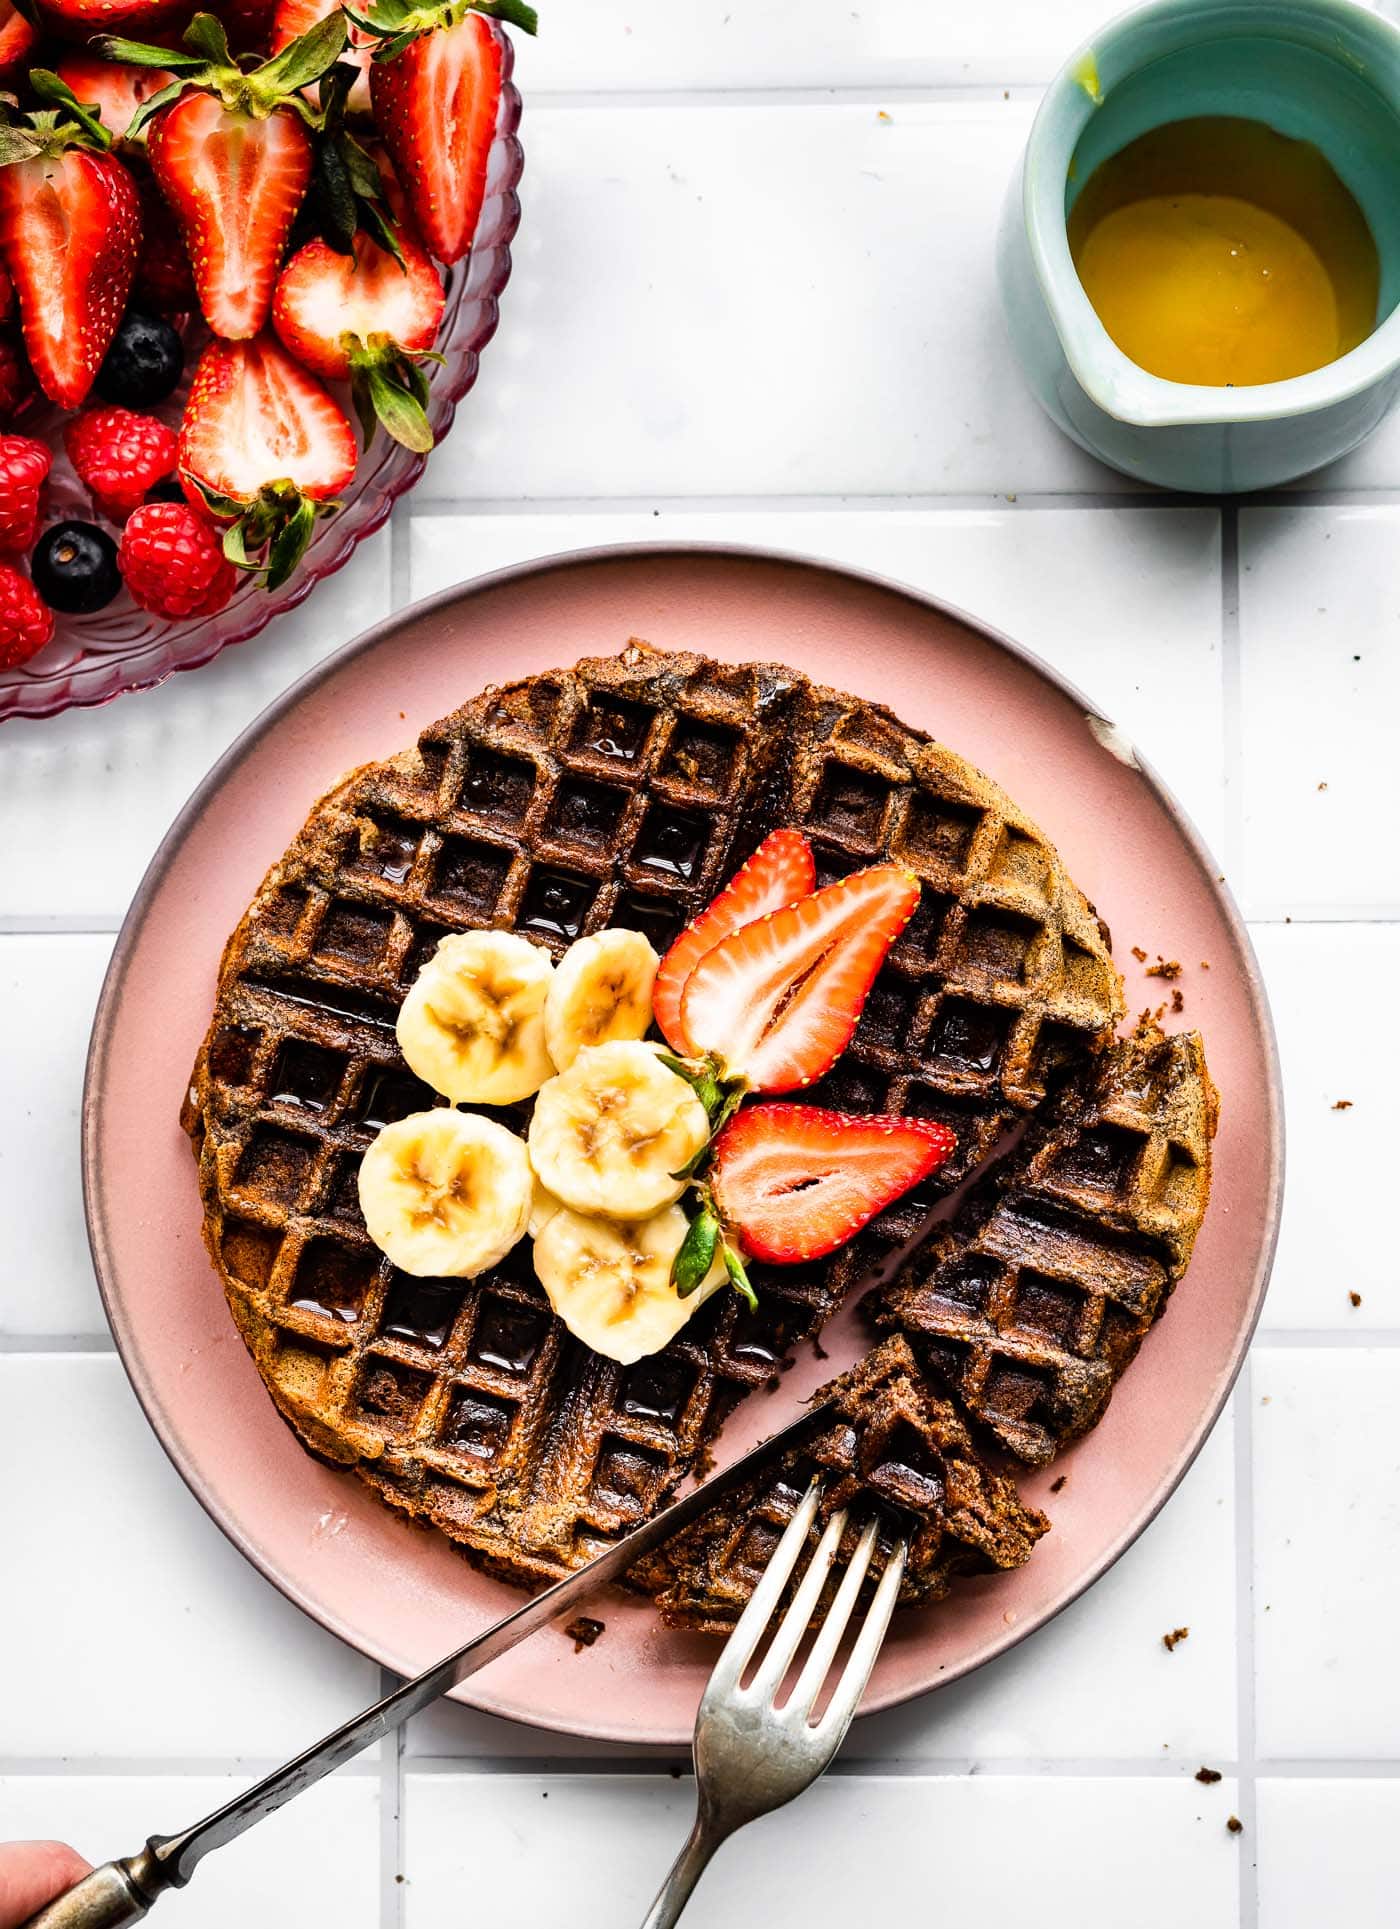 overhead image of a vegan buckwheat banana waffle on a pink plate topped with strawberries and bananas being sliced into with a knife and fork, a bowl of strawberries and blueberries, and a container of syrup